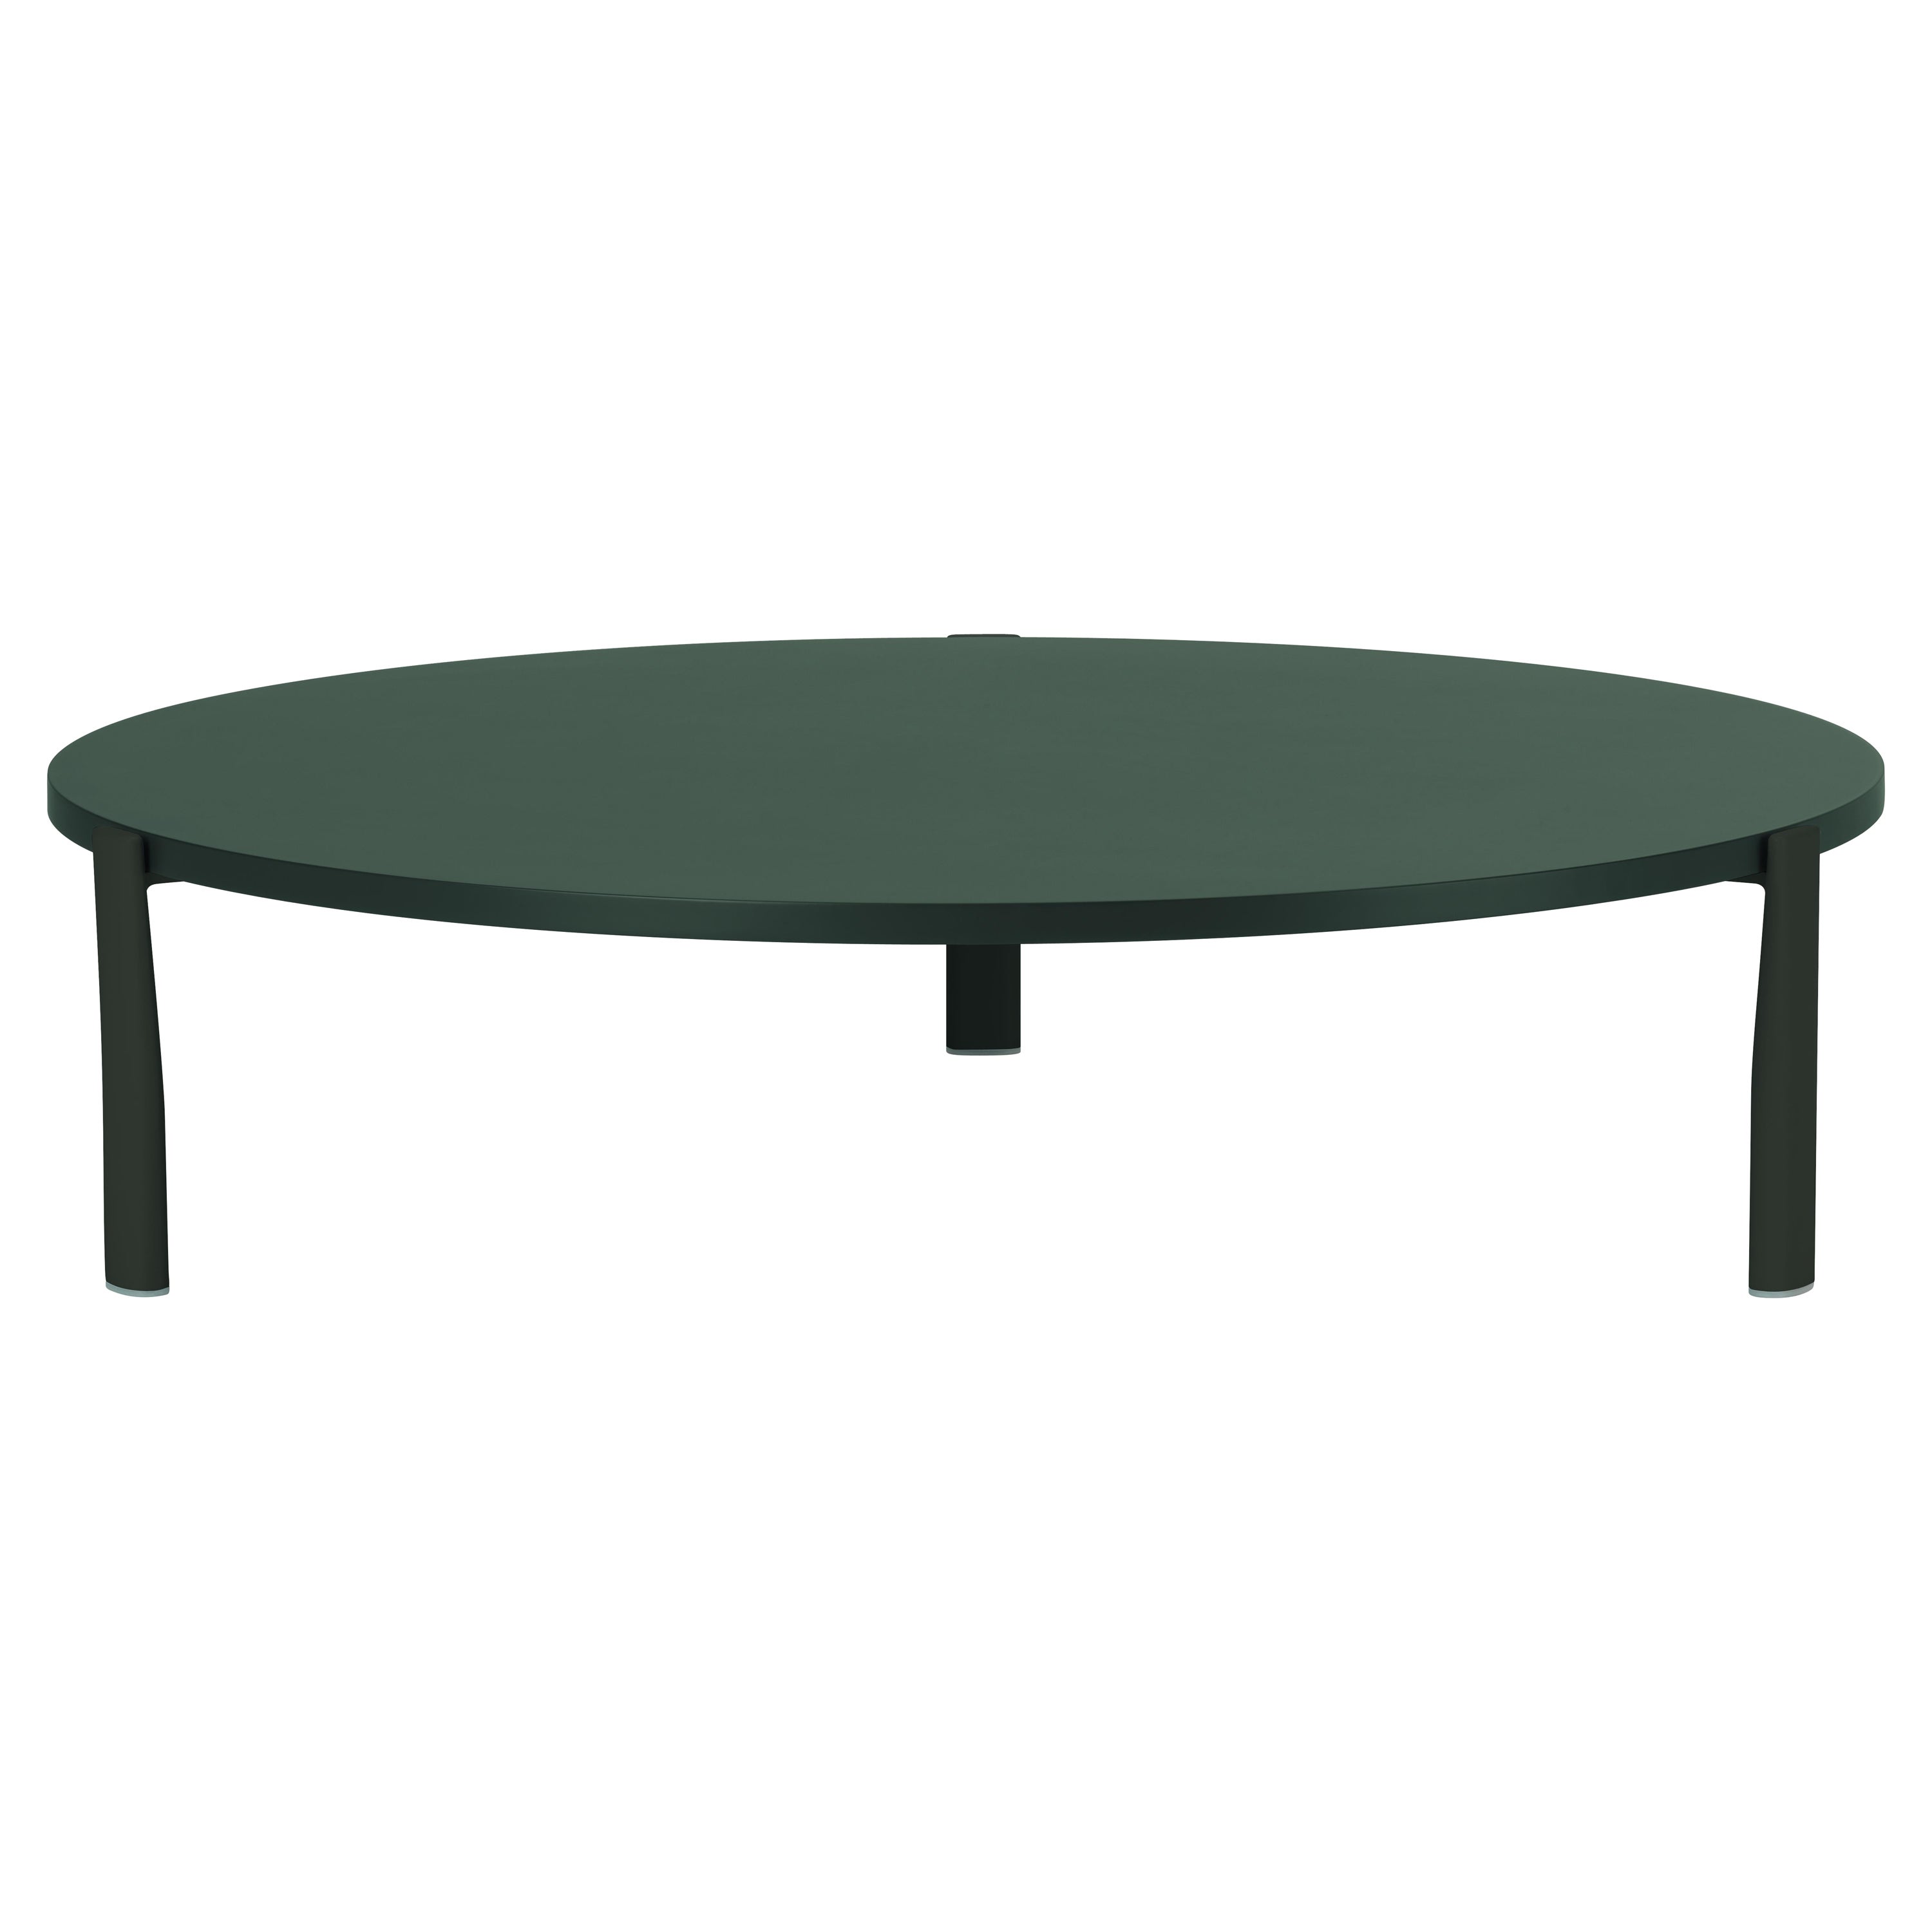 Alias 955 Eleven Low Table Singular Round w Grey Color MDF & Lacquered Frame For Sale